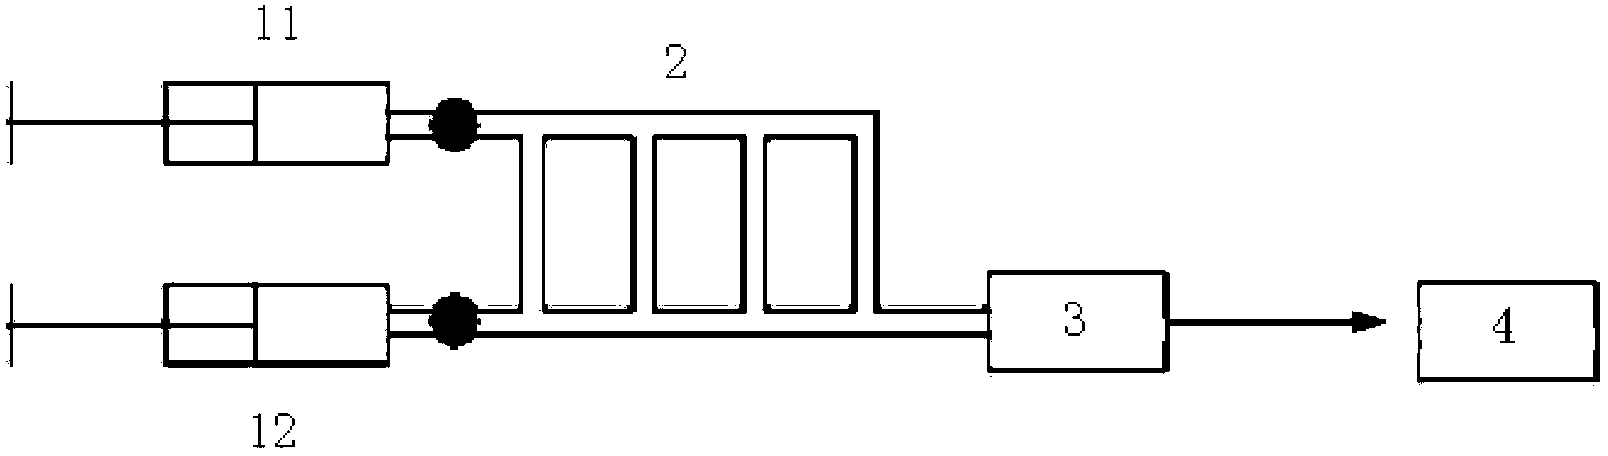 Method for measuring ion strength of substance